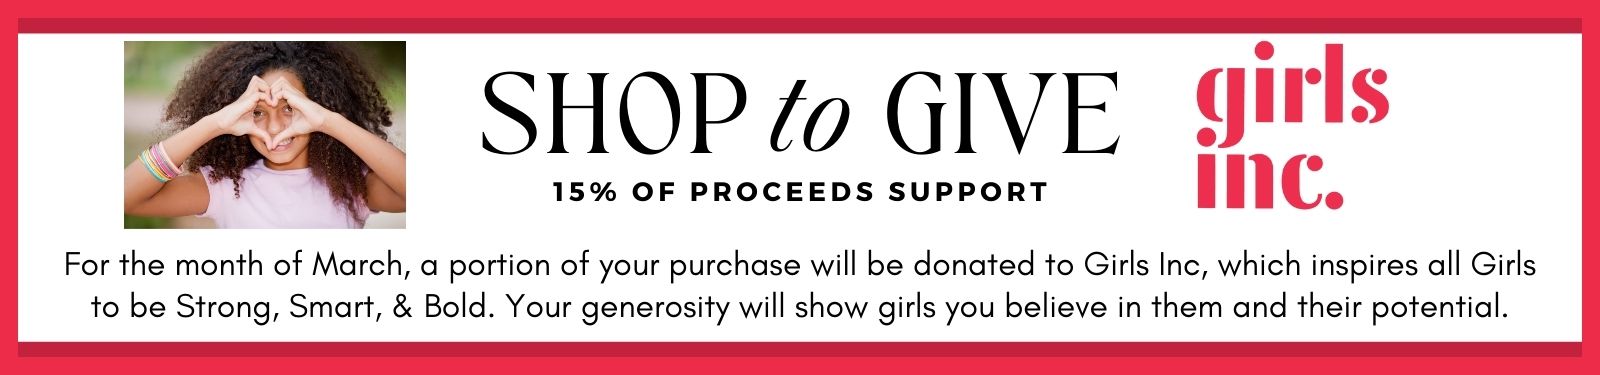 For the month of March, Charles Albert Jewelry will donate 15% of your purchase to Girls Inc, which inspires all Girls to be Strong, Smart, & Bold. Your generosity will show girls you believe in them and their potential.